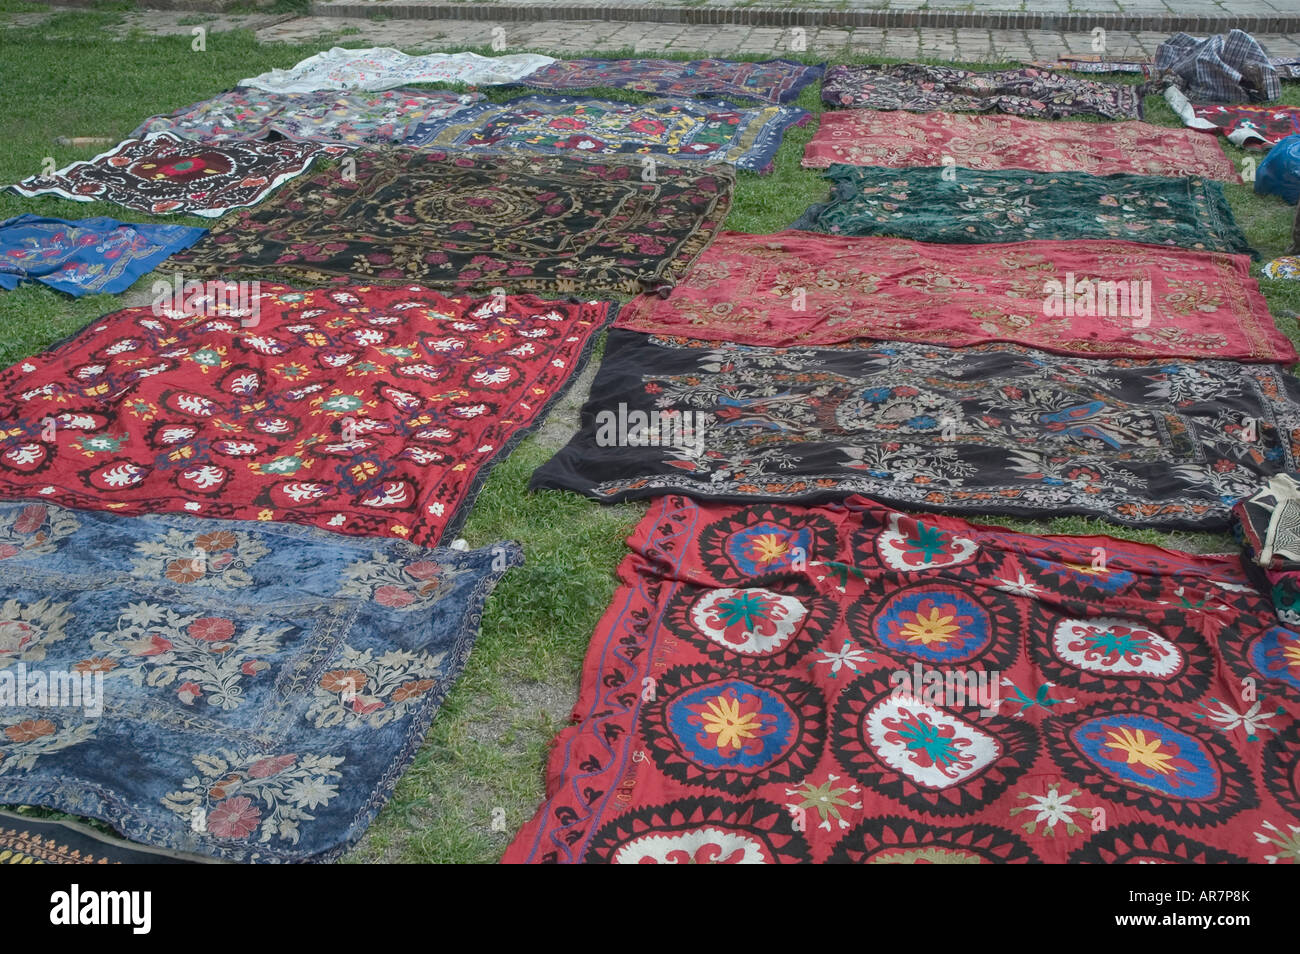 A collection of hand embroidered Suzani Textiles spread out on the ground for sale Shakhrisabz (Shakrisabs) – Uzbekistan Stock Photo